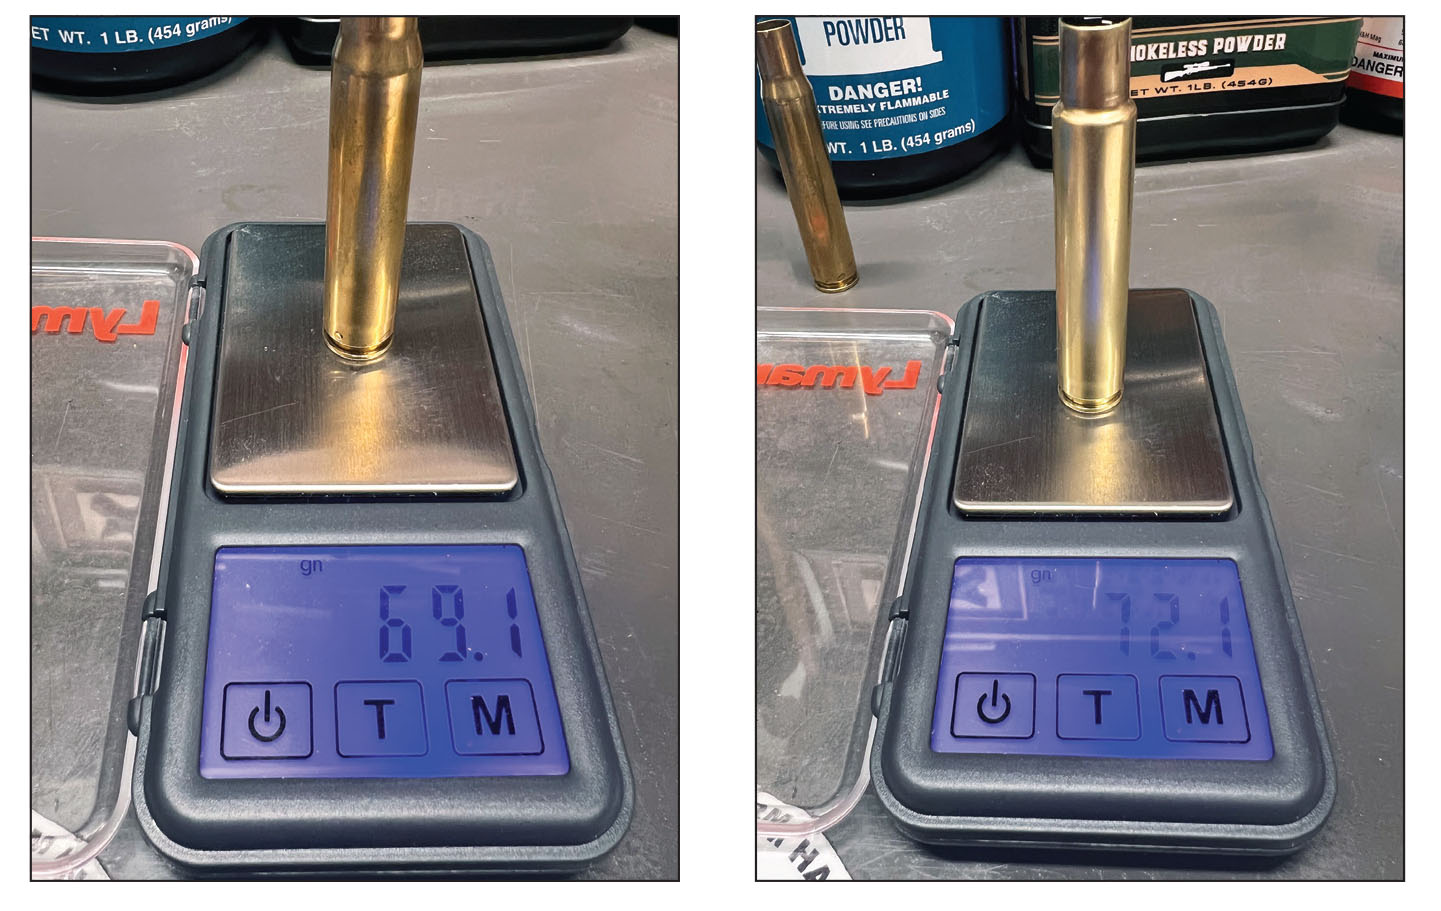 The .338-06 A-Square brass (left) had a water capacity of 69.1 grains while the .338-06 AI (right) had a water capacity of 72.1 grains. Both cases were made by Remington.